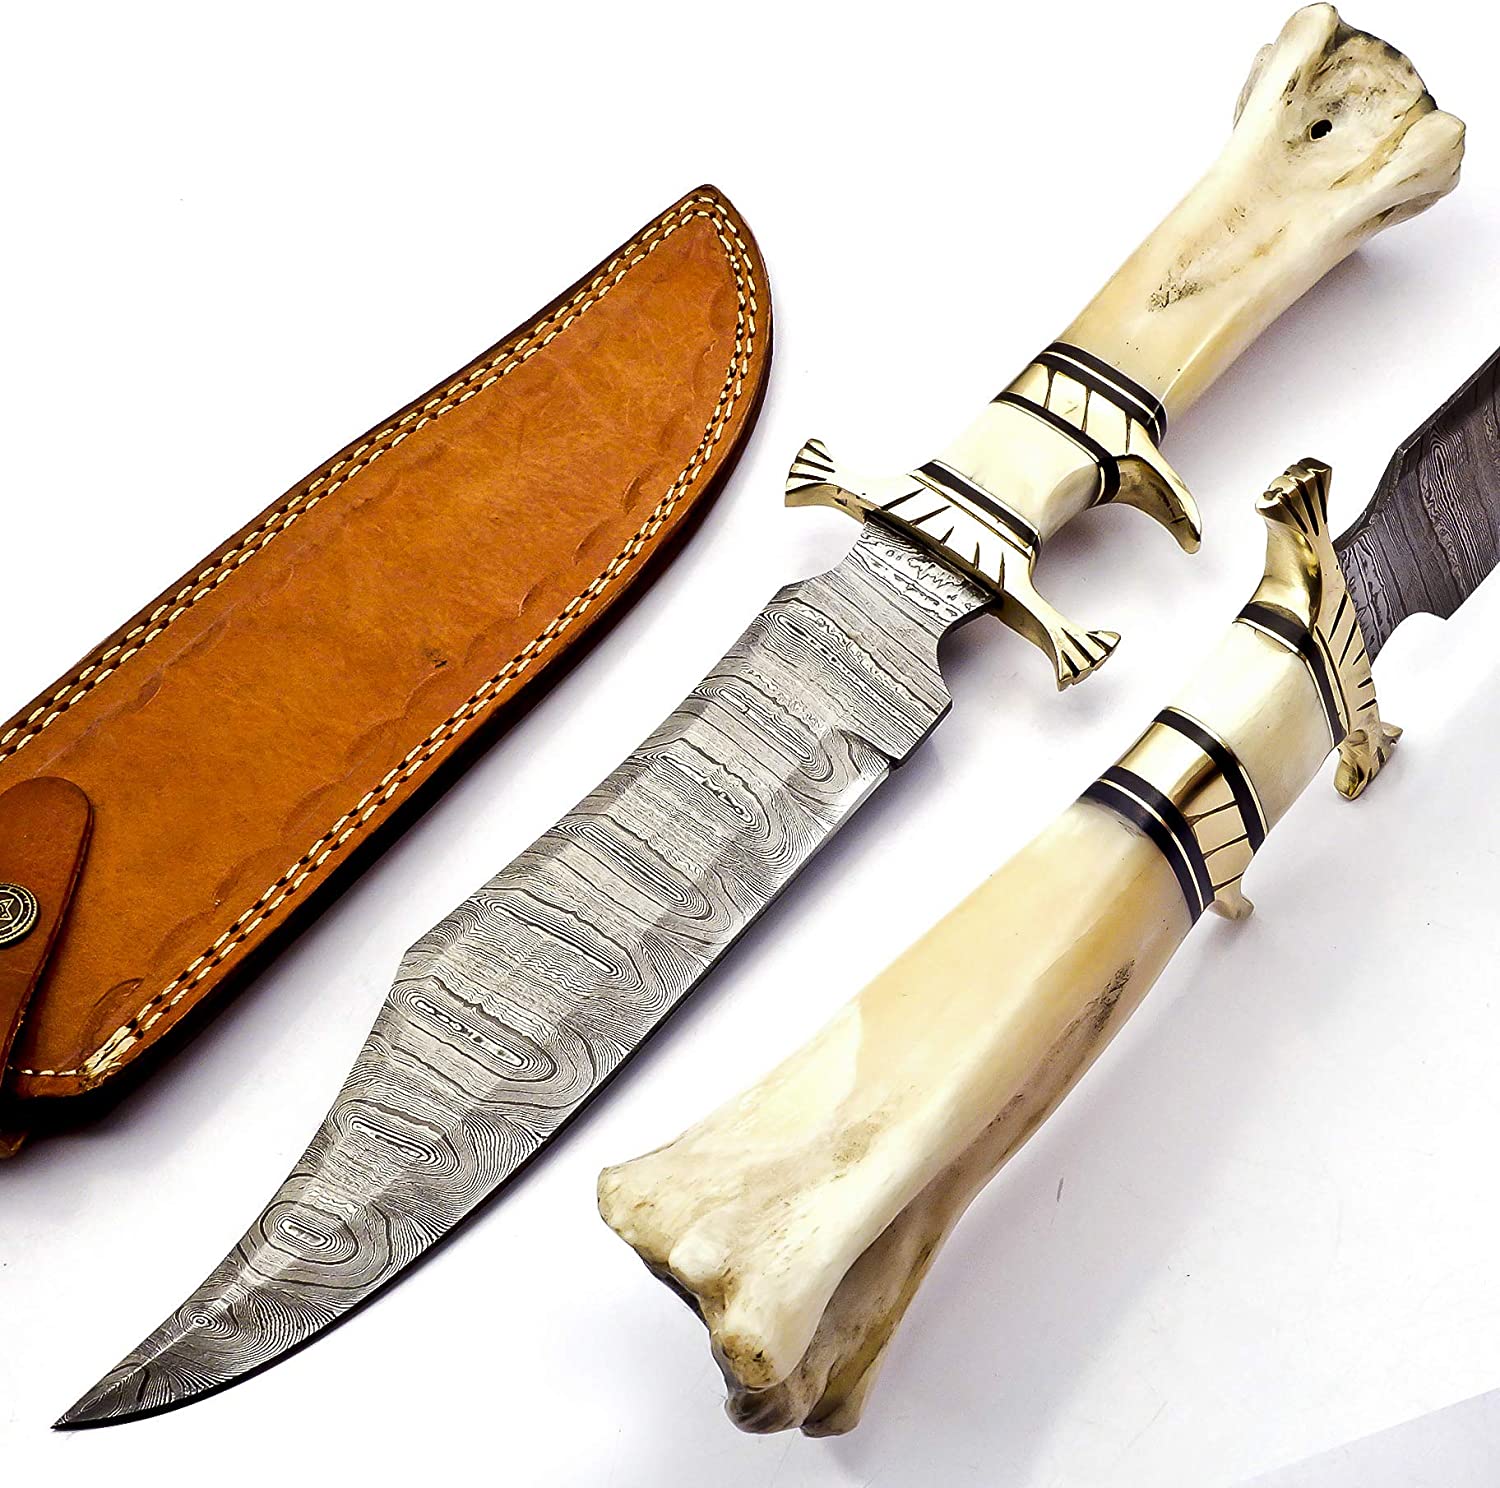 HandSmith 15" Handmade Damascus Steel Hunting Knife, Hand Forged Damascus Steel Fixed Blade Bowie Knife, Genuine Leather Sheath, Camel Bone Handle Firm Grip (White)